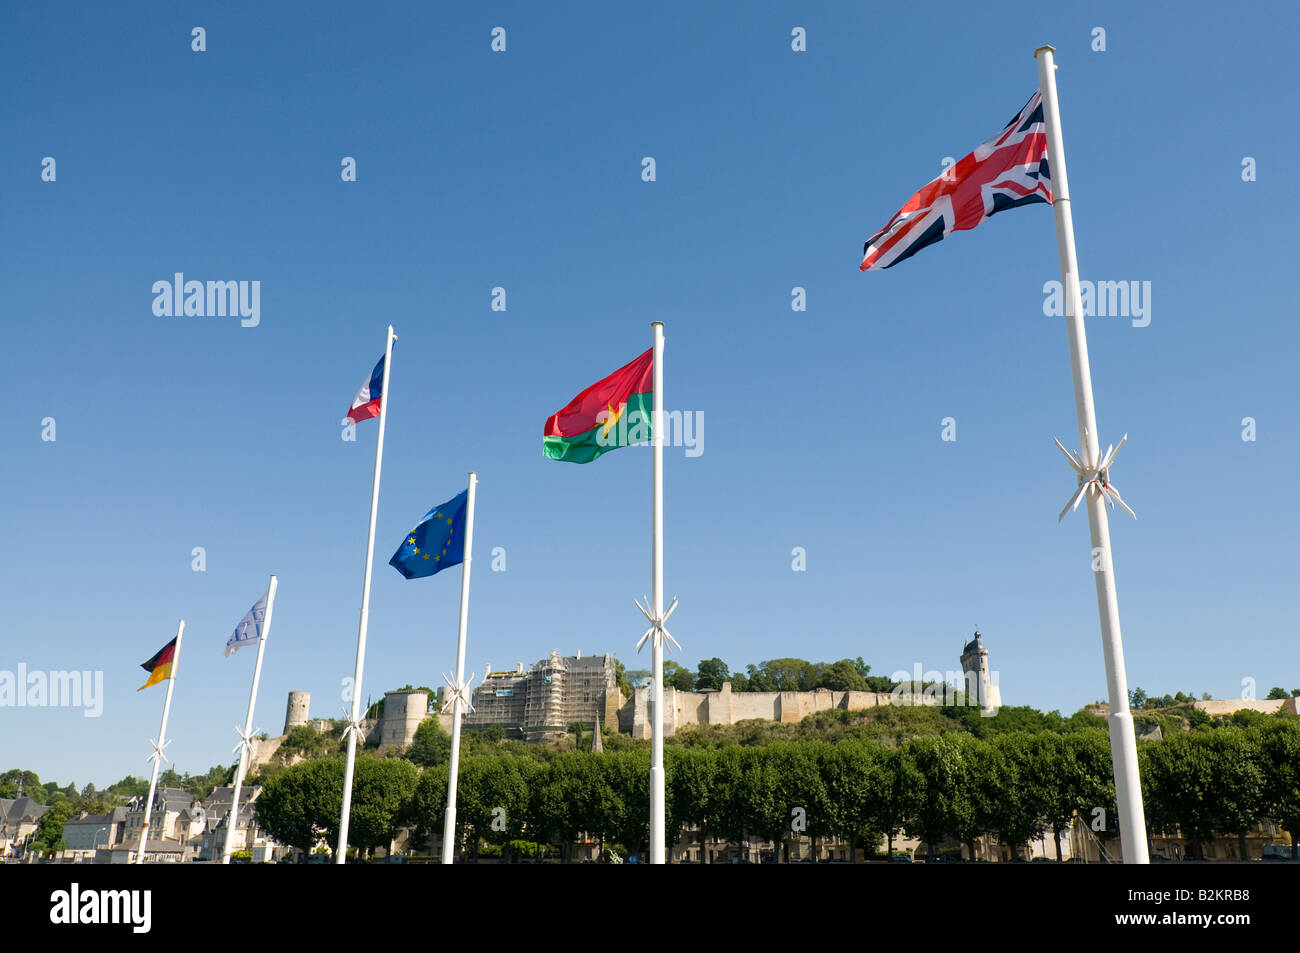 Display of European flags and view of the Royal Fortress of Chinon, France. Stock Photo